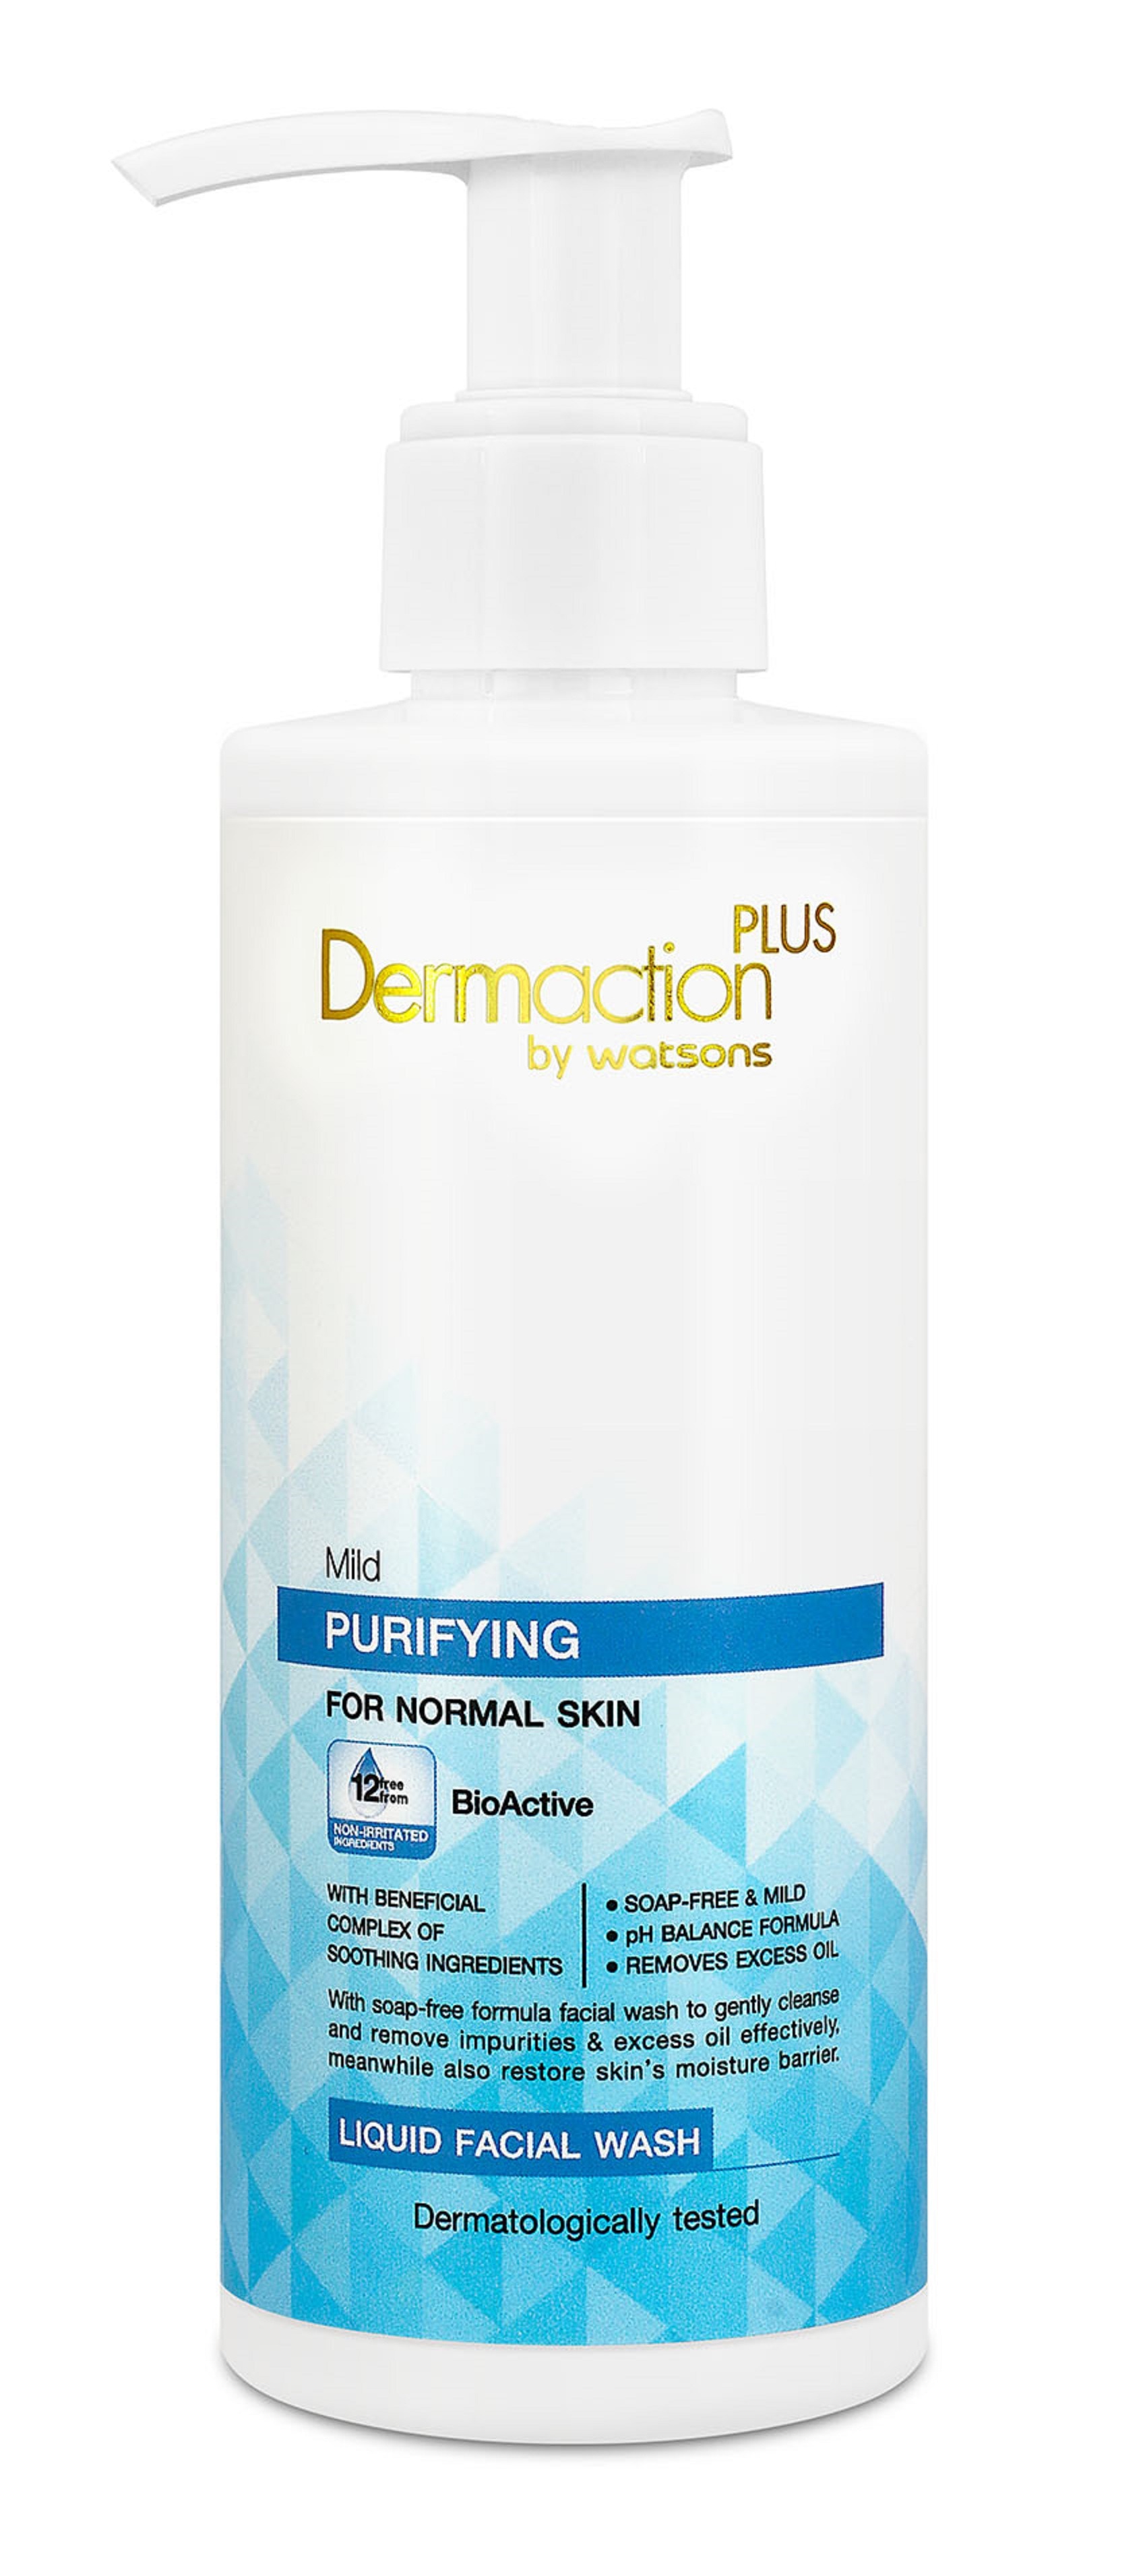 Dermaction Plus by Watsons Mild Purifying Liquid Facial Wash